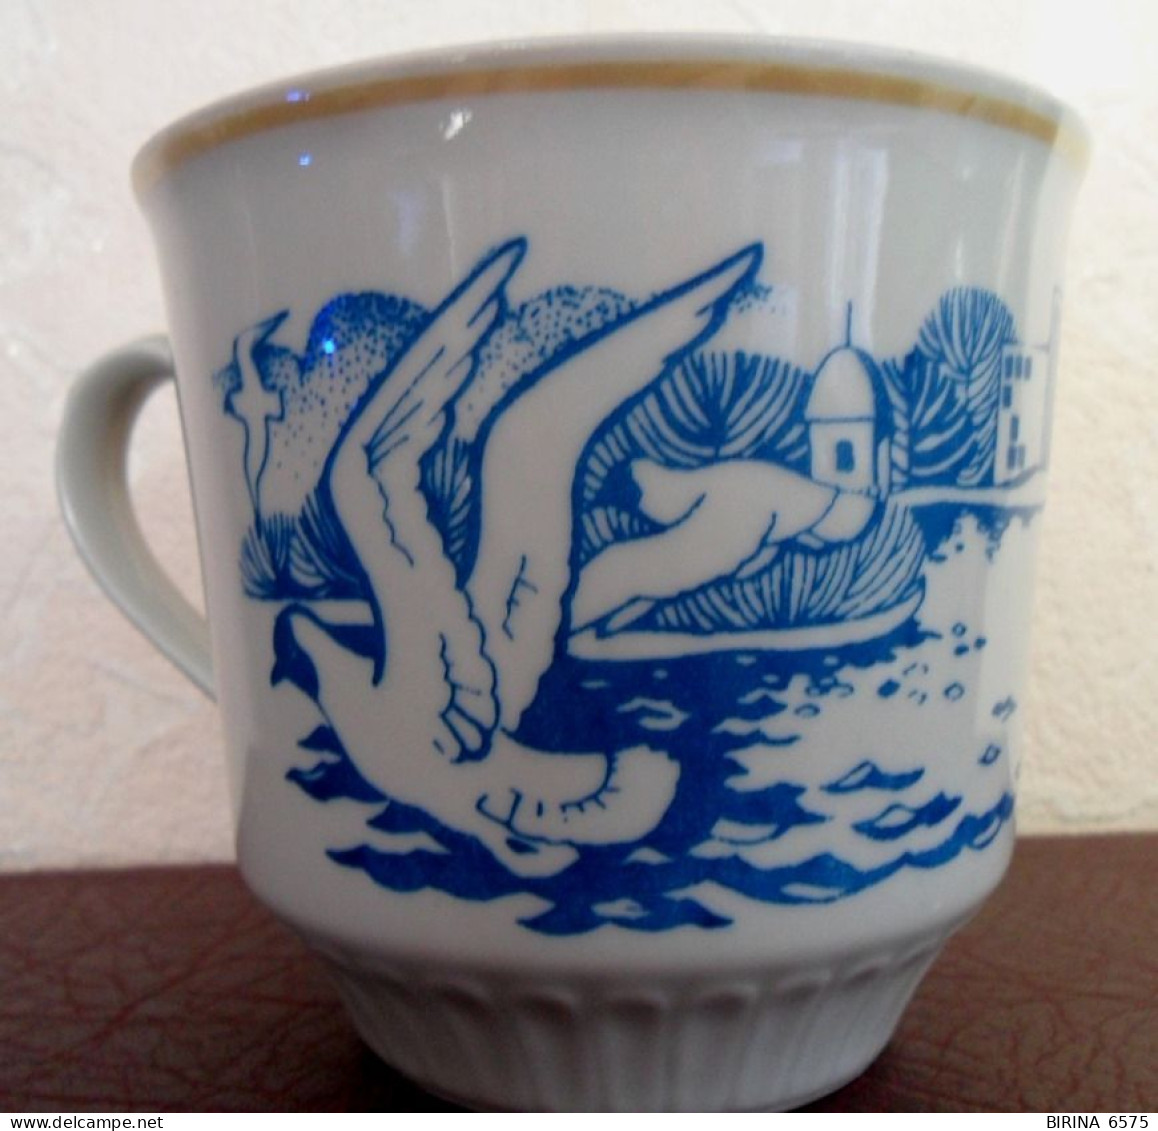 A Cup. Cup. SEAGULLS. Sea. TERNOPIL PORCELAIN FACTORY. USSR. - 8-48-i - Tassen